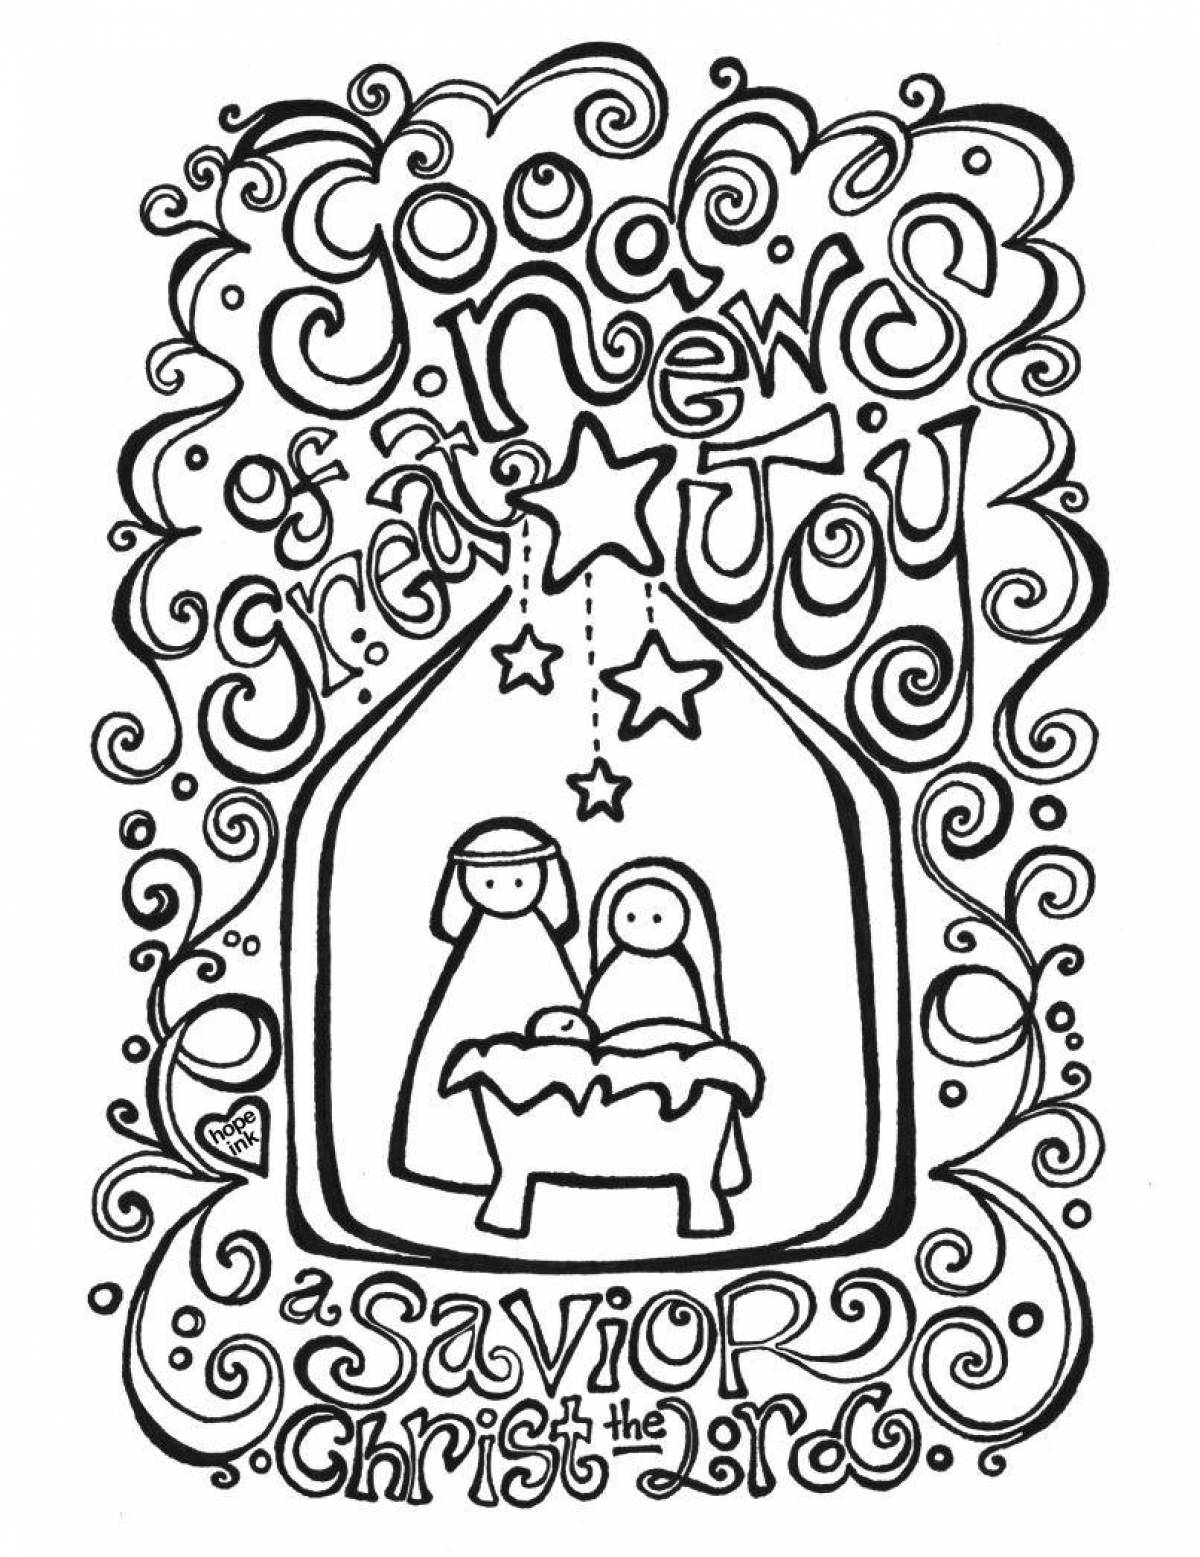 Sunday school fairy tale Christmas coloring book